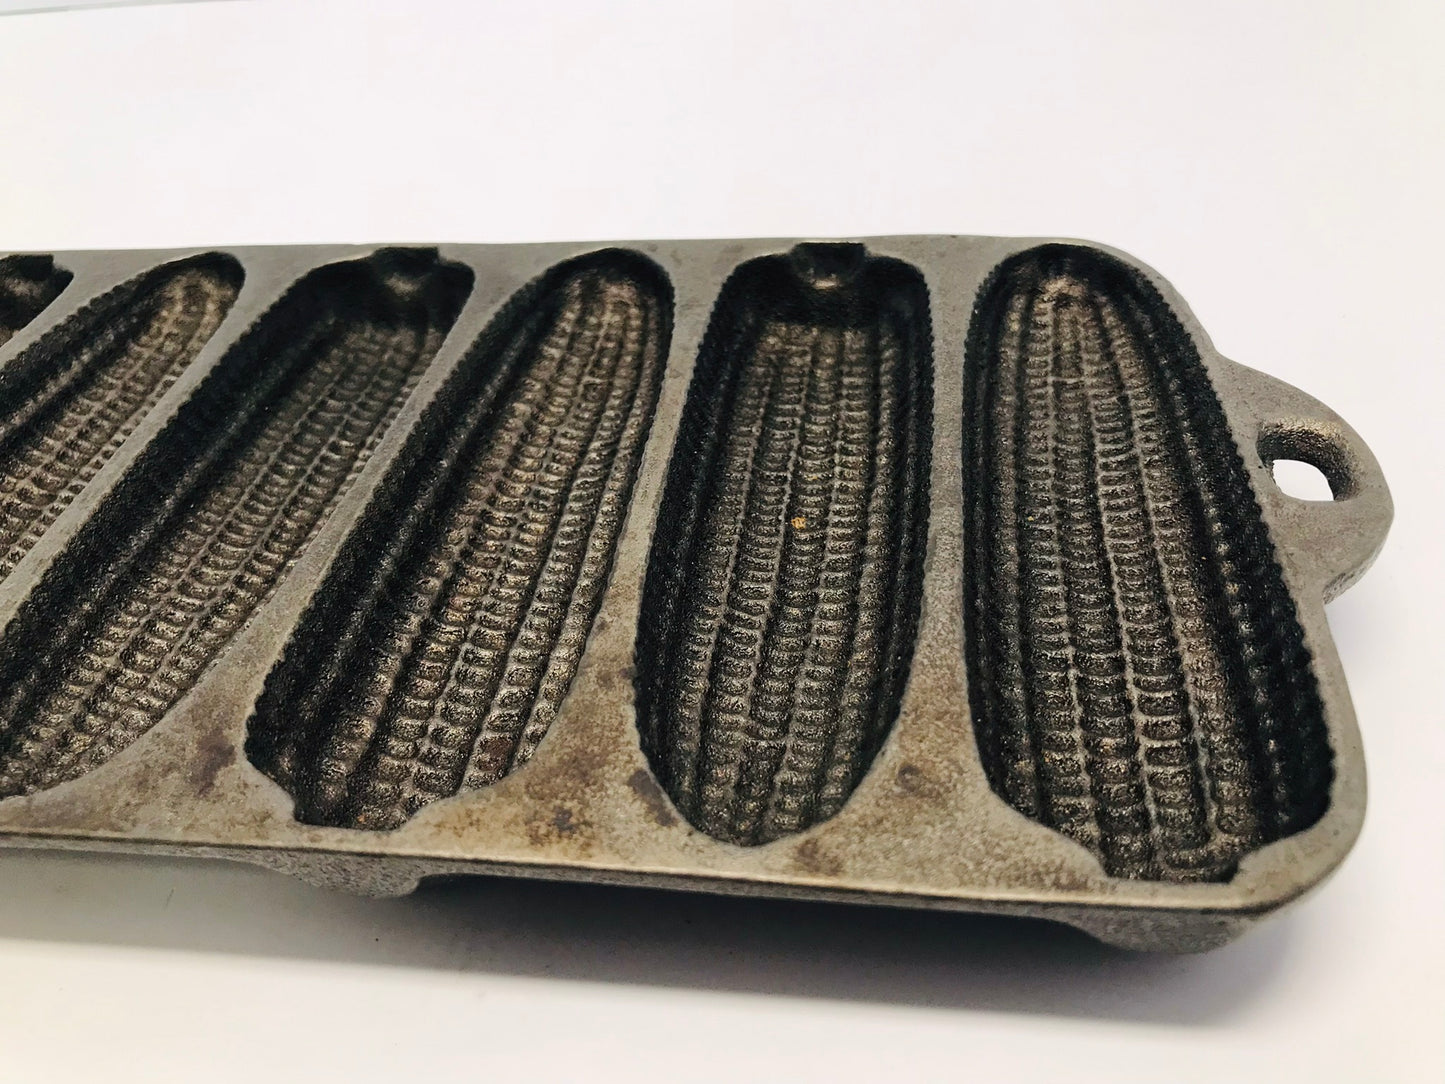 Cast Iron Cornbread Pan Camping Vintage 1960s Wagner Ware Imprinted Bottom Outstanding Quality RARE